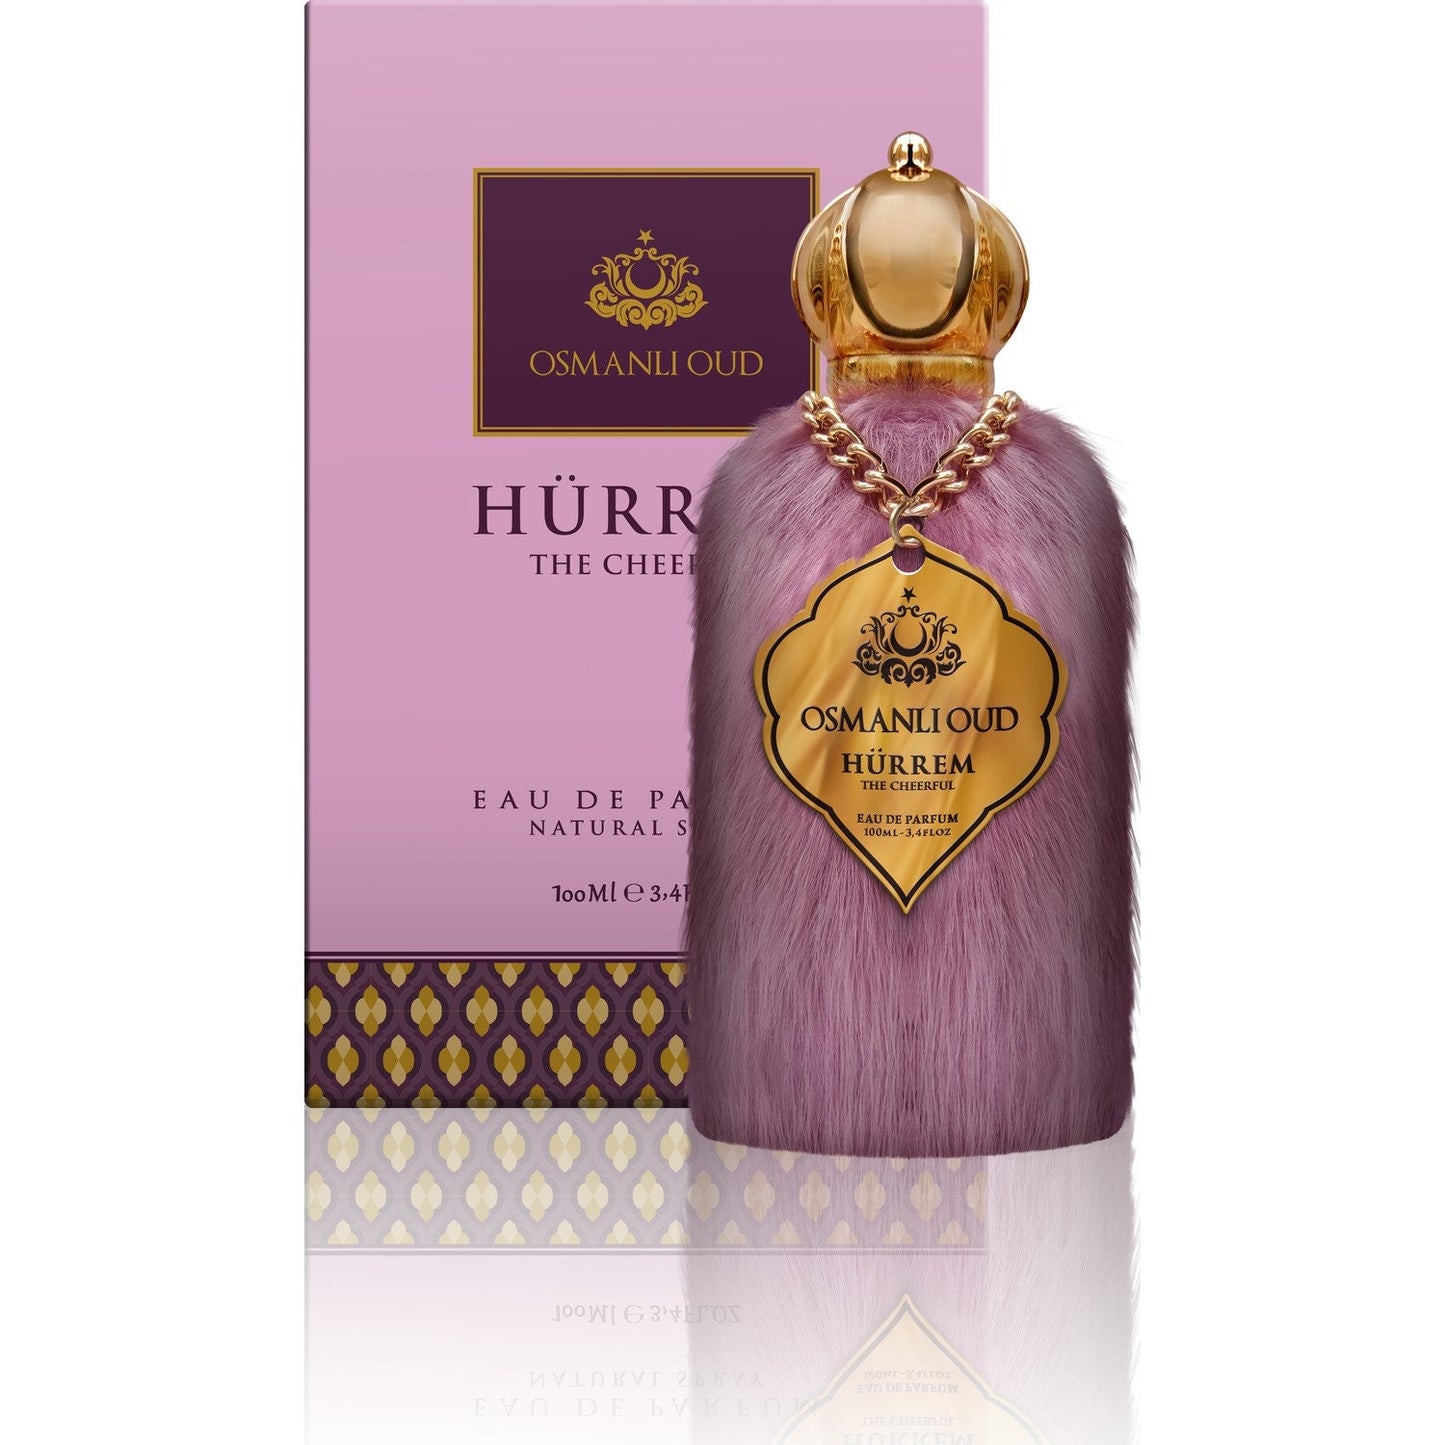 Hurrem and Suleiman Original Perfume SET OF 2, Hurrem "The Cheerful" and Sultan Suleiman "The Magnificent" Gift Set for Lovers, Original Set